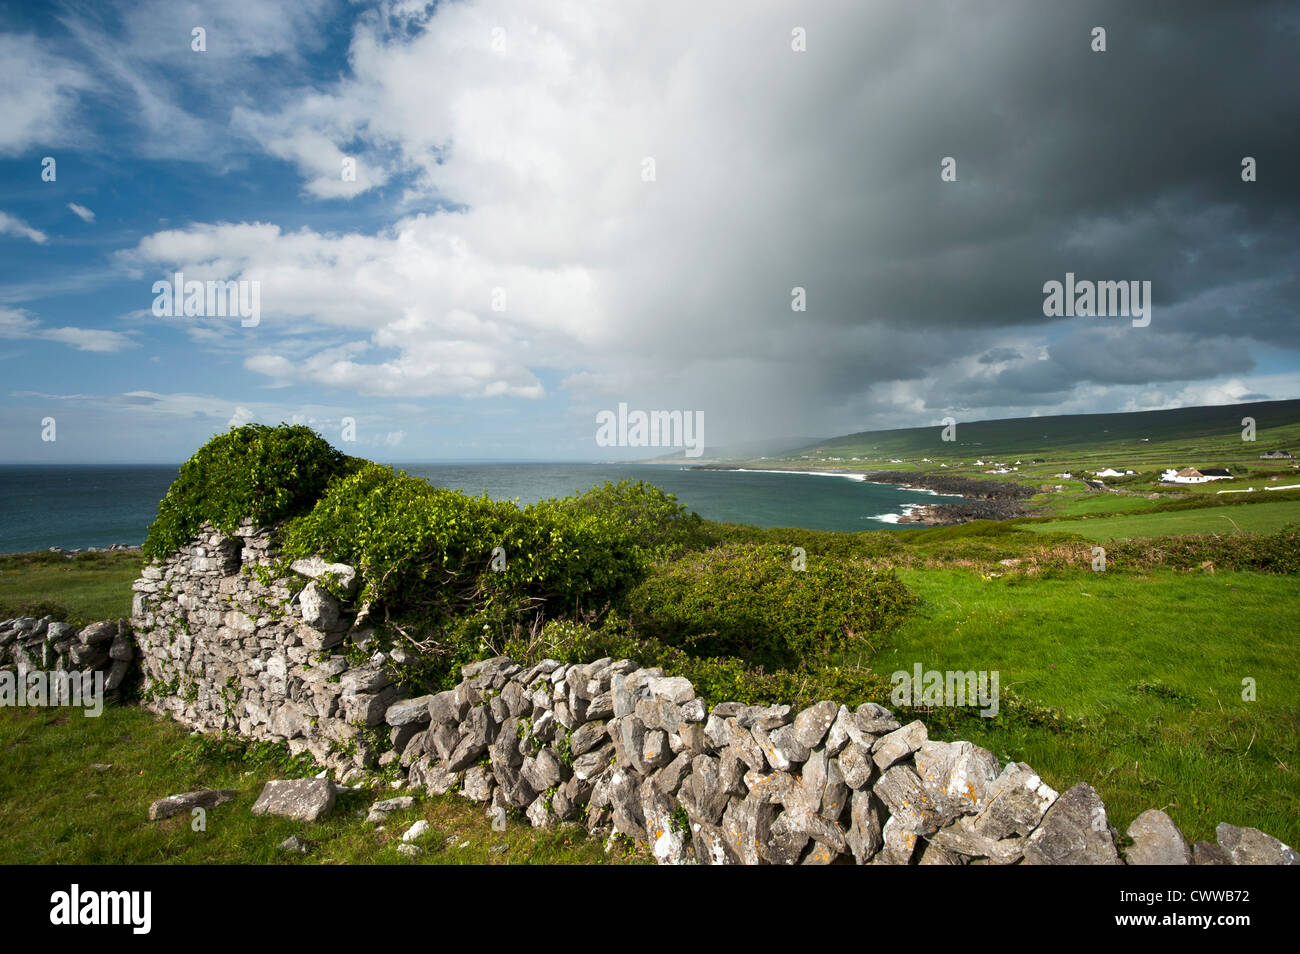 Grass on stone wall in rural landscape Stock Photo